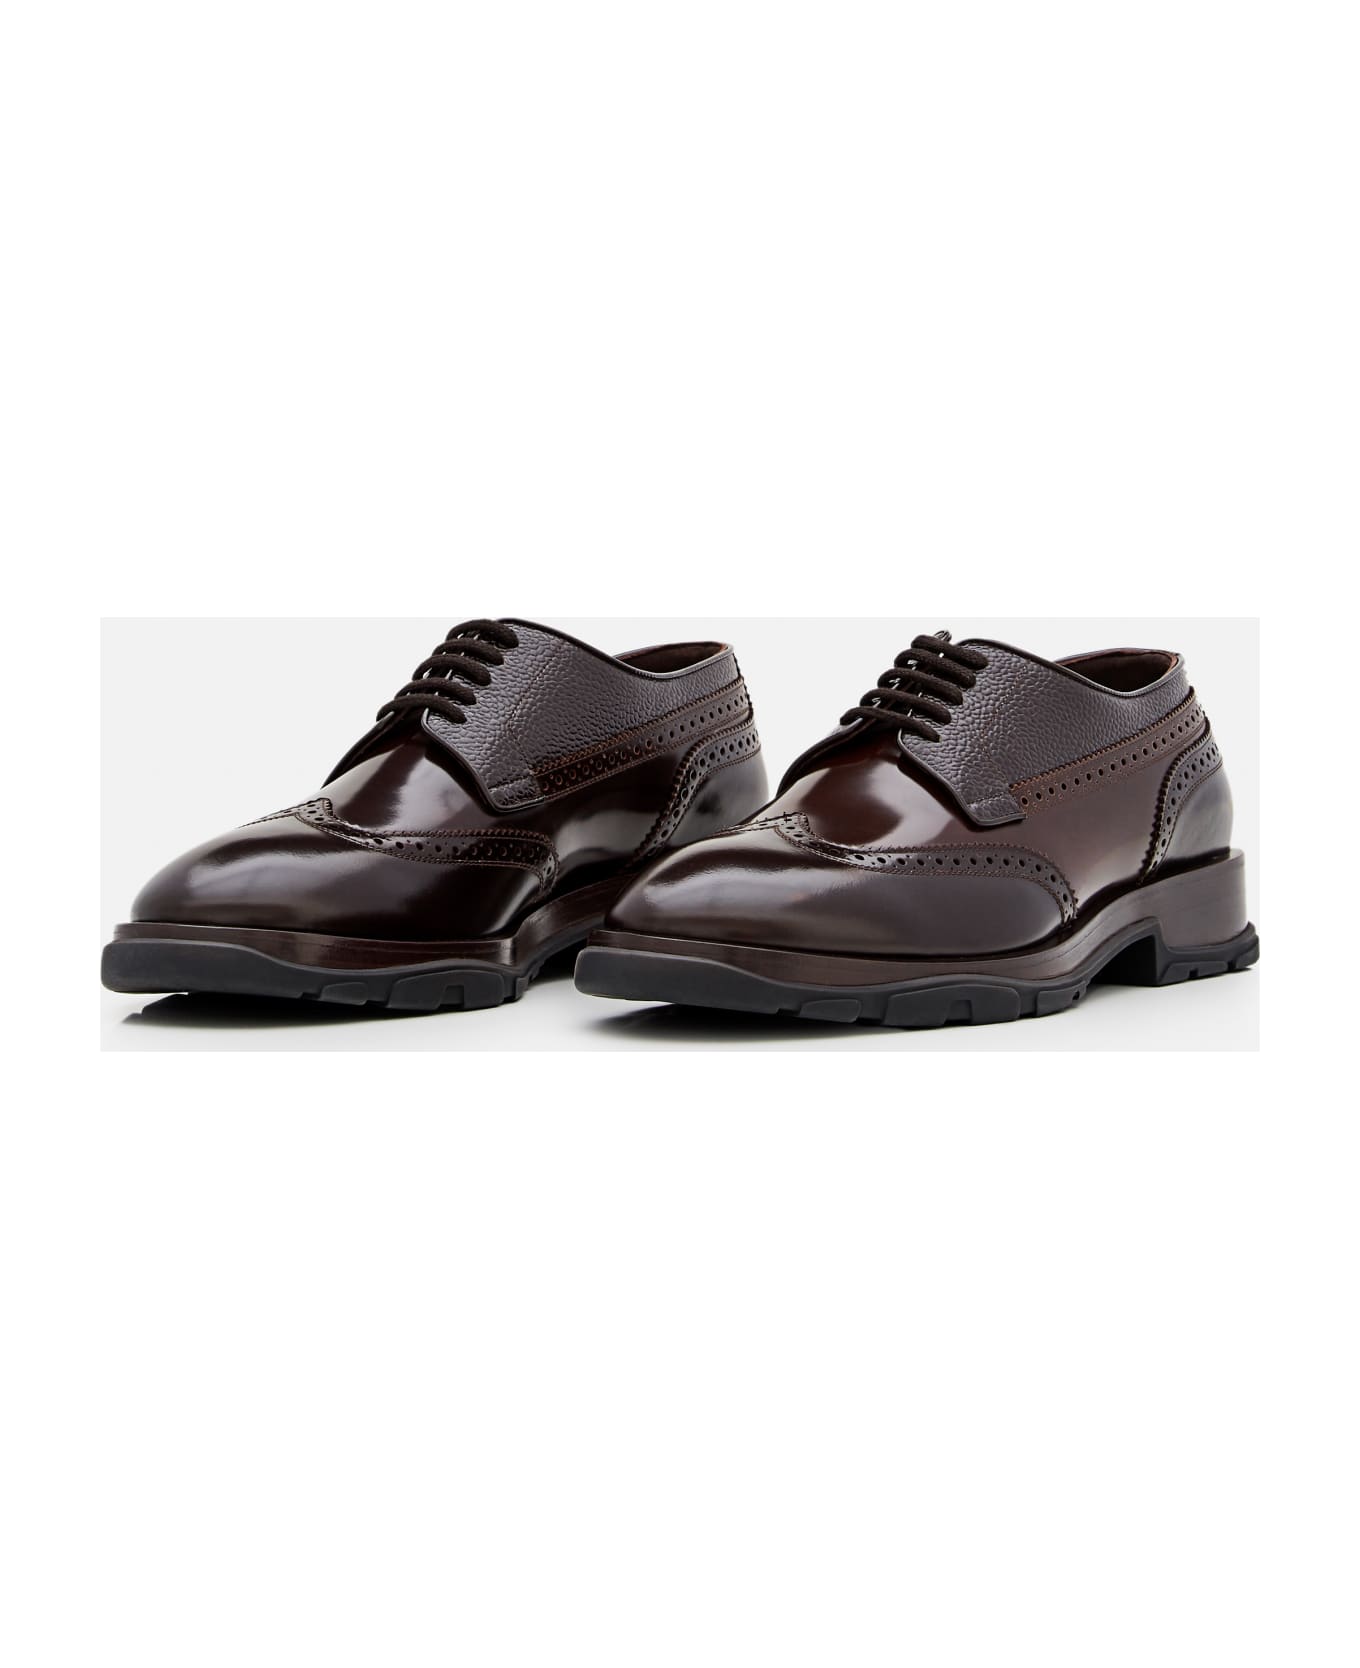 Alexander McQueen Derby Leather Shoes - Brown ローファー＆デッキシューズ